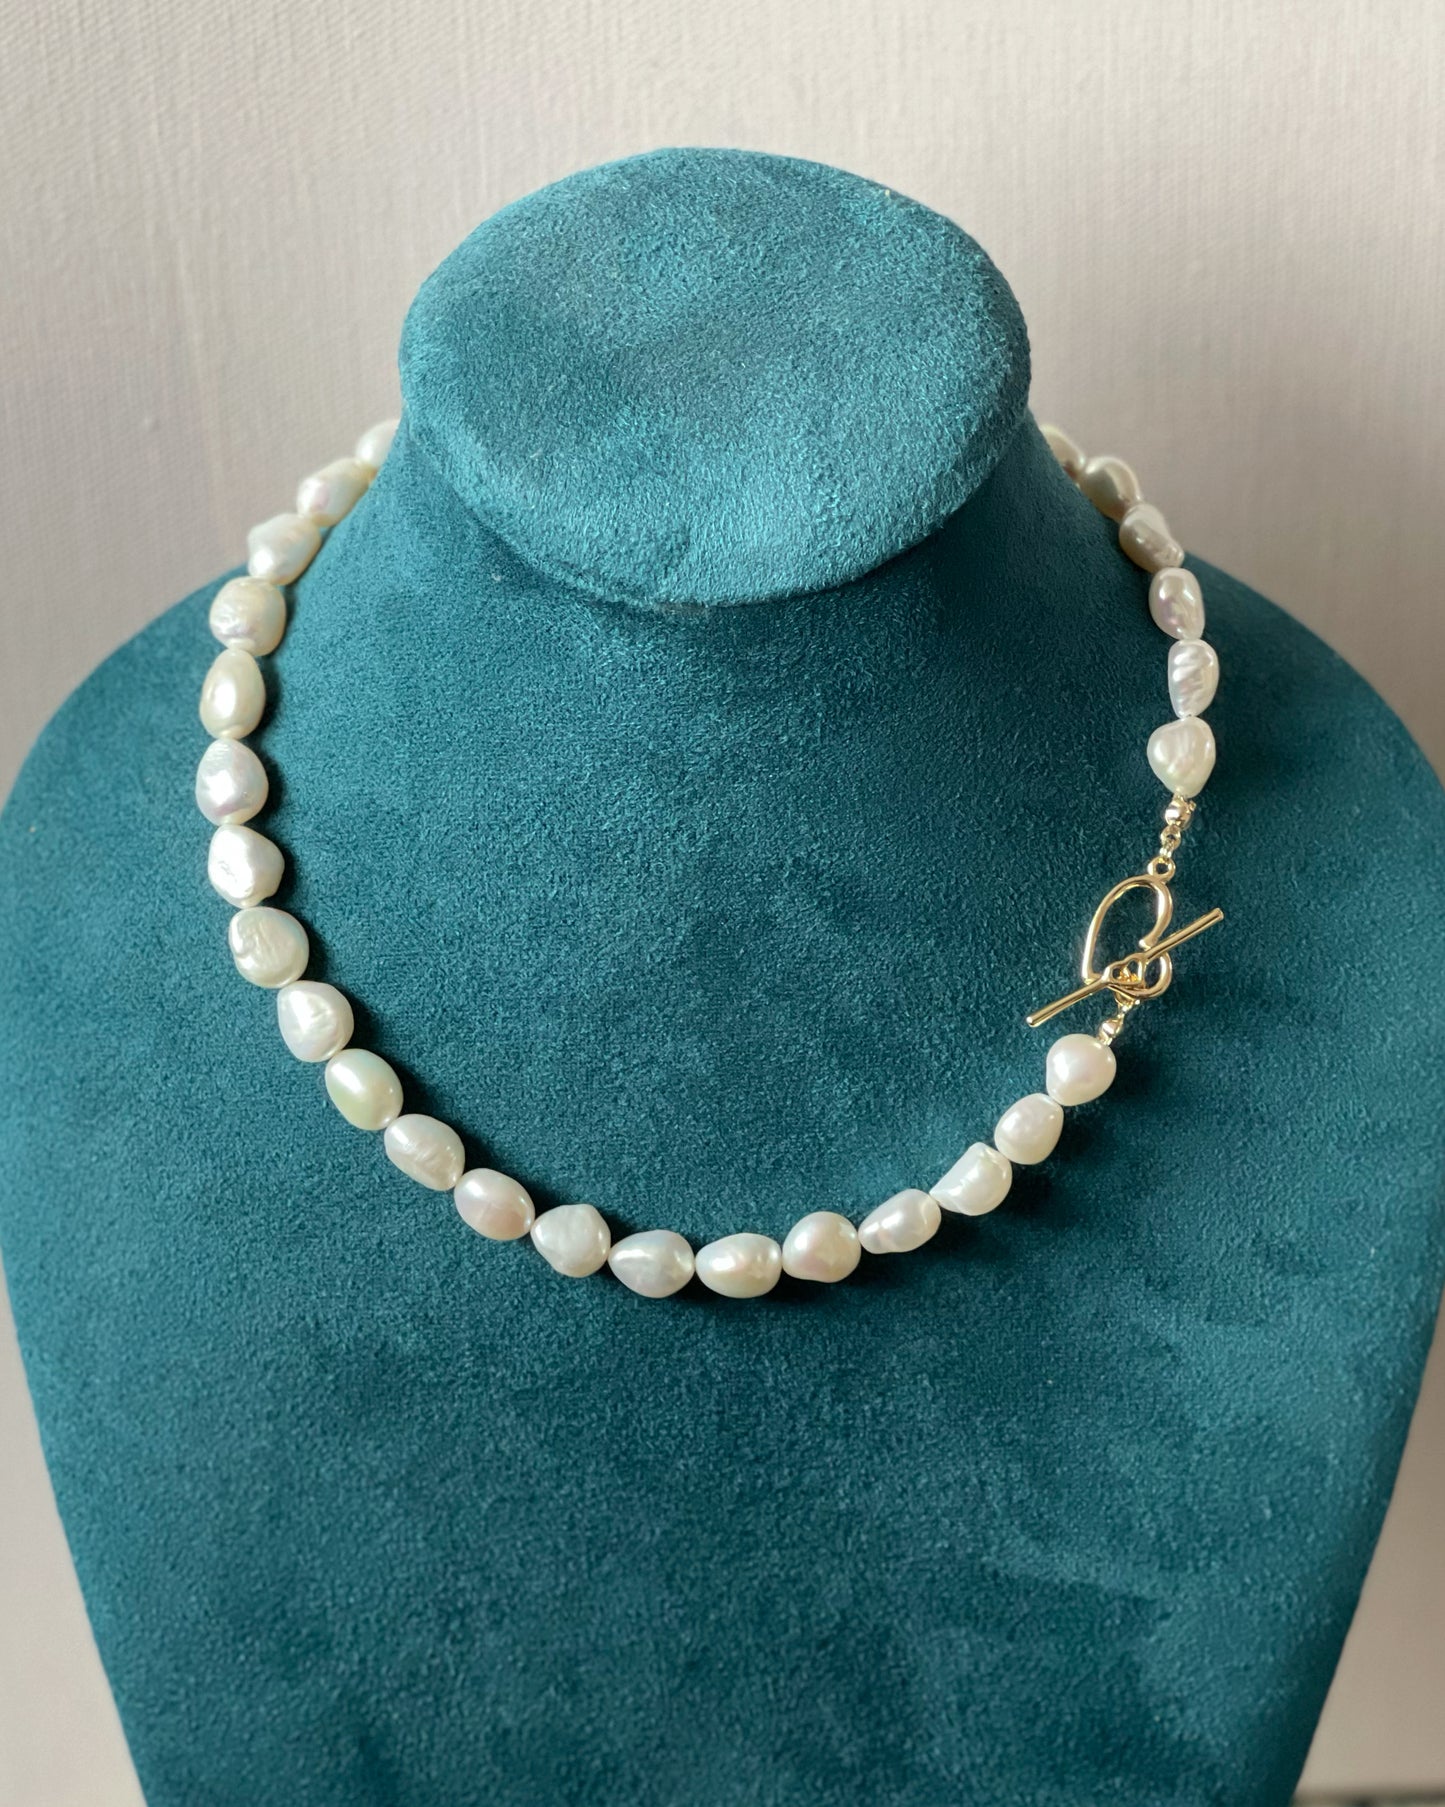 Medium white wedding pearl necklace with heart toggle